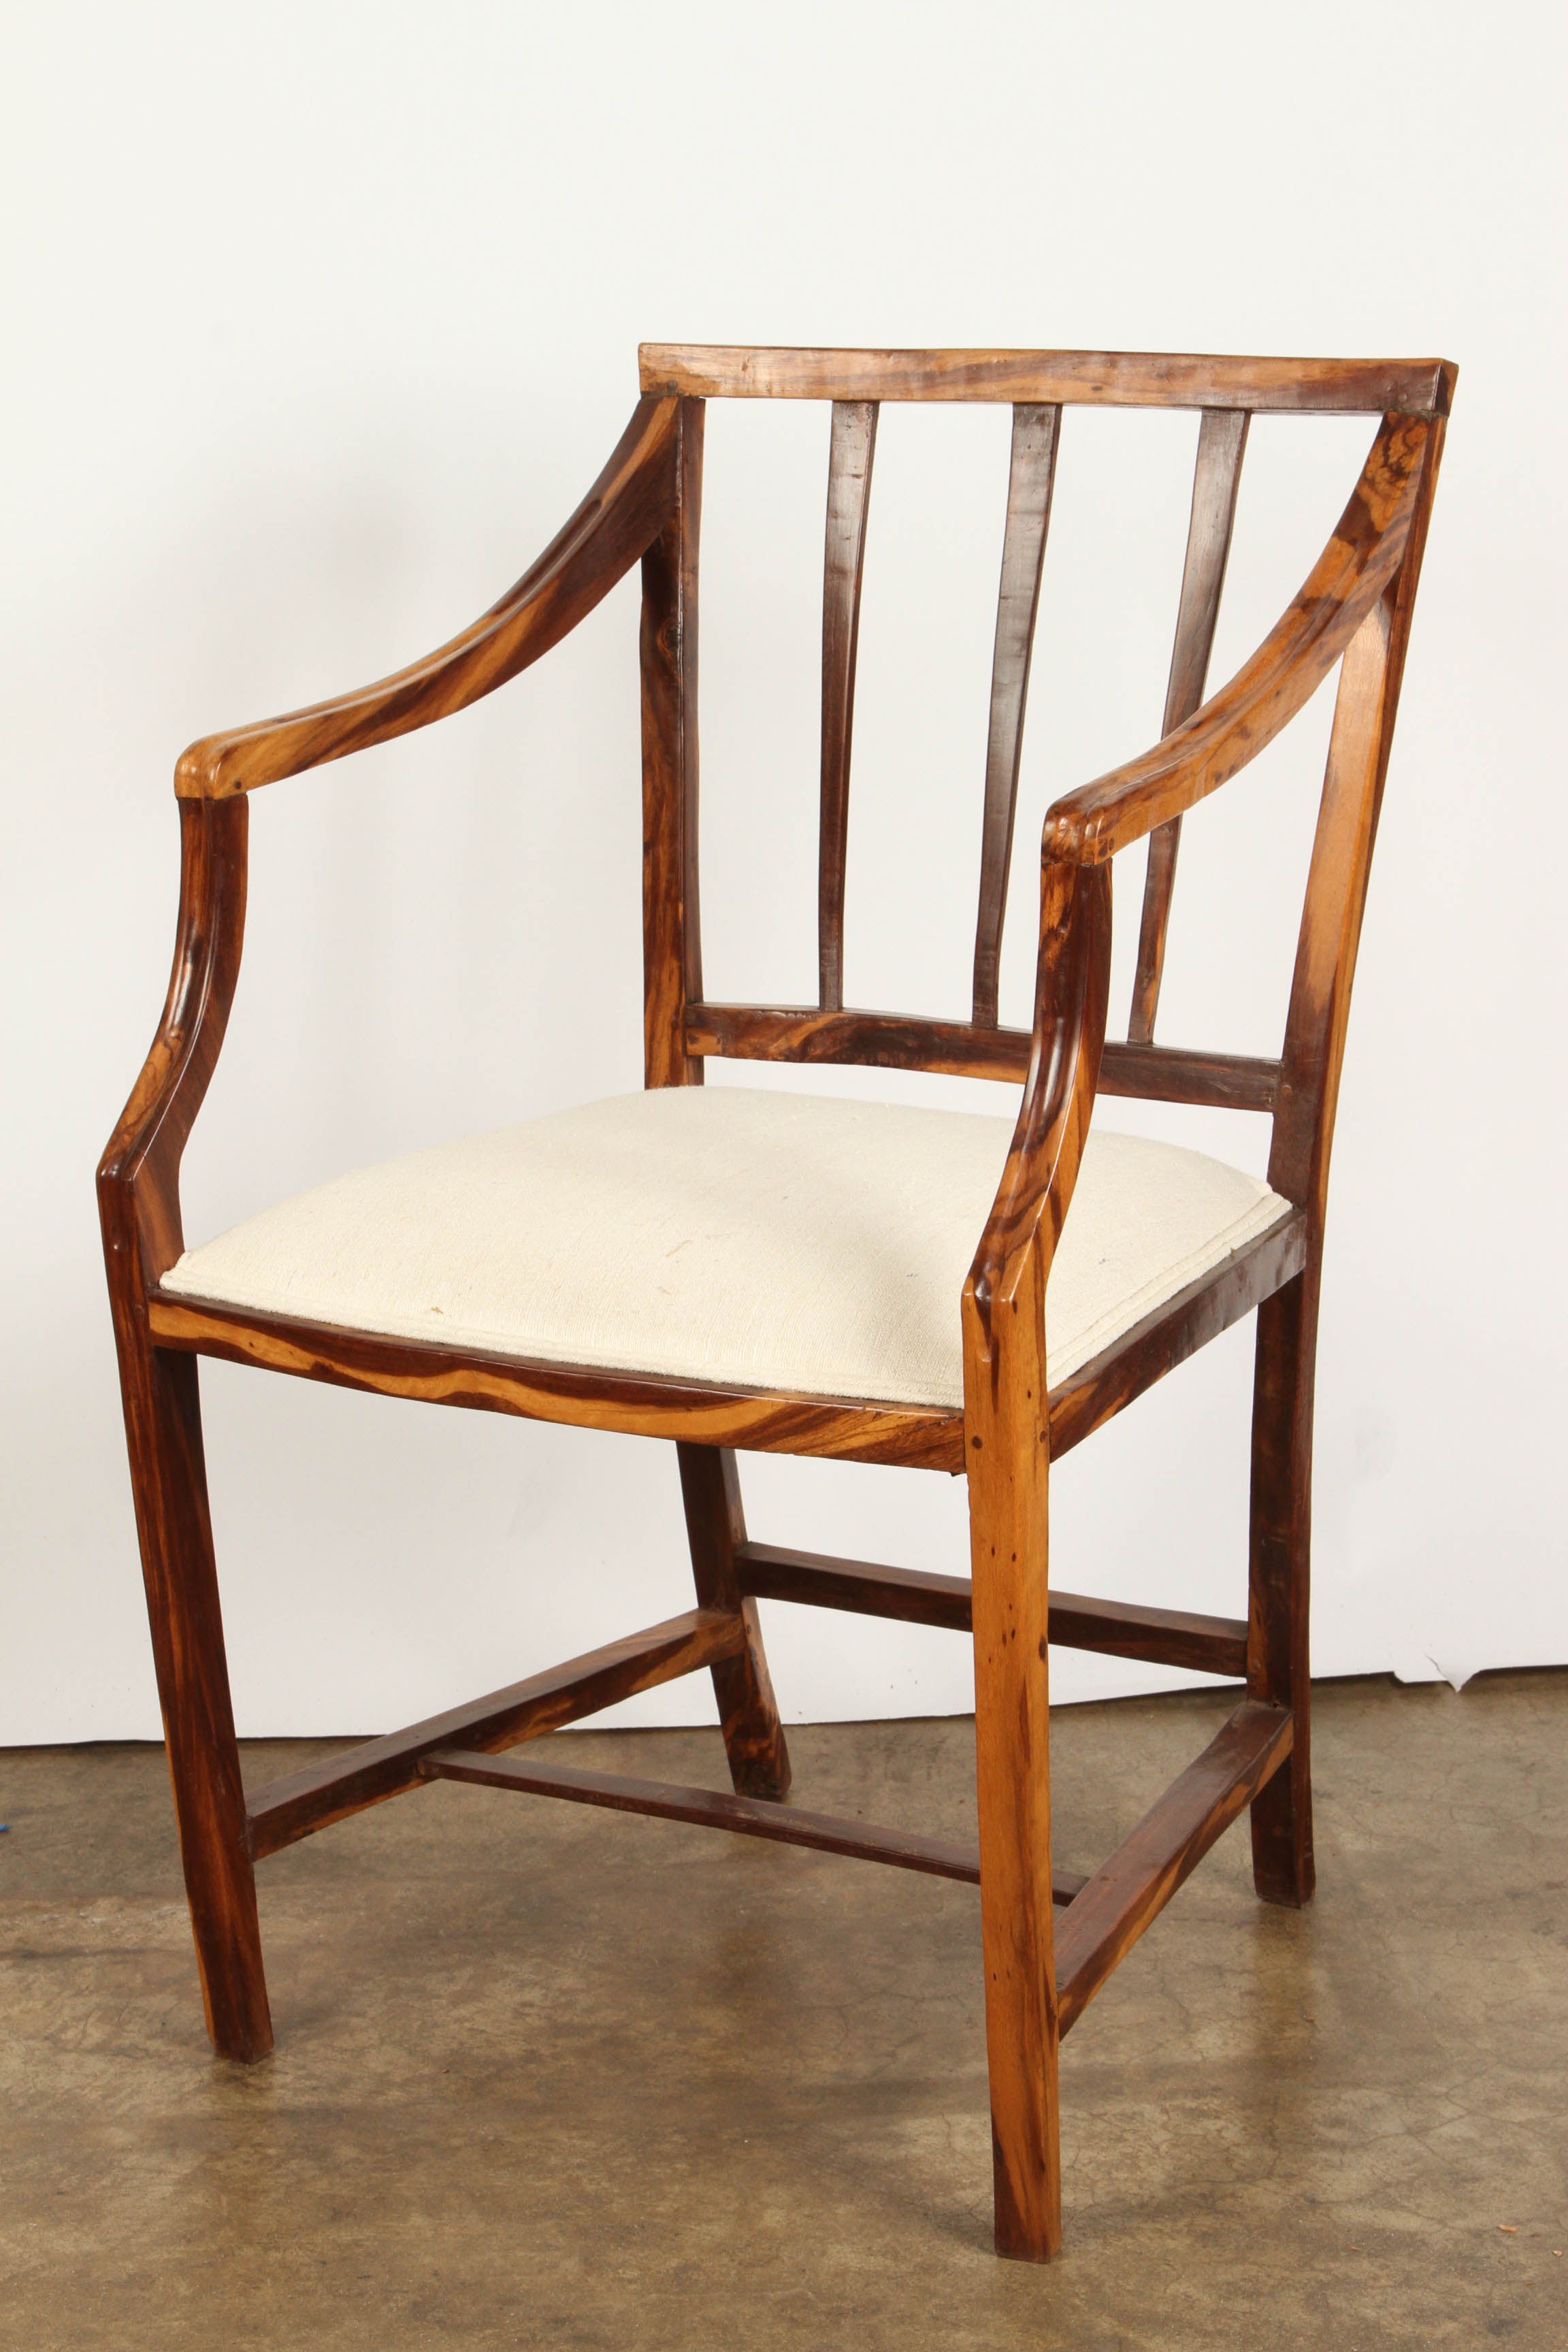 A pair of rare calamander colonial armchairs, from Sri Lanka (Ceylon). They are well figured, with new upholstery on the seats. These colonial chairs are in a simple Portuguese Colonial design.